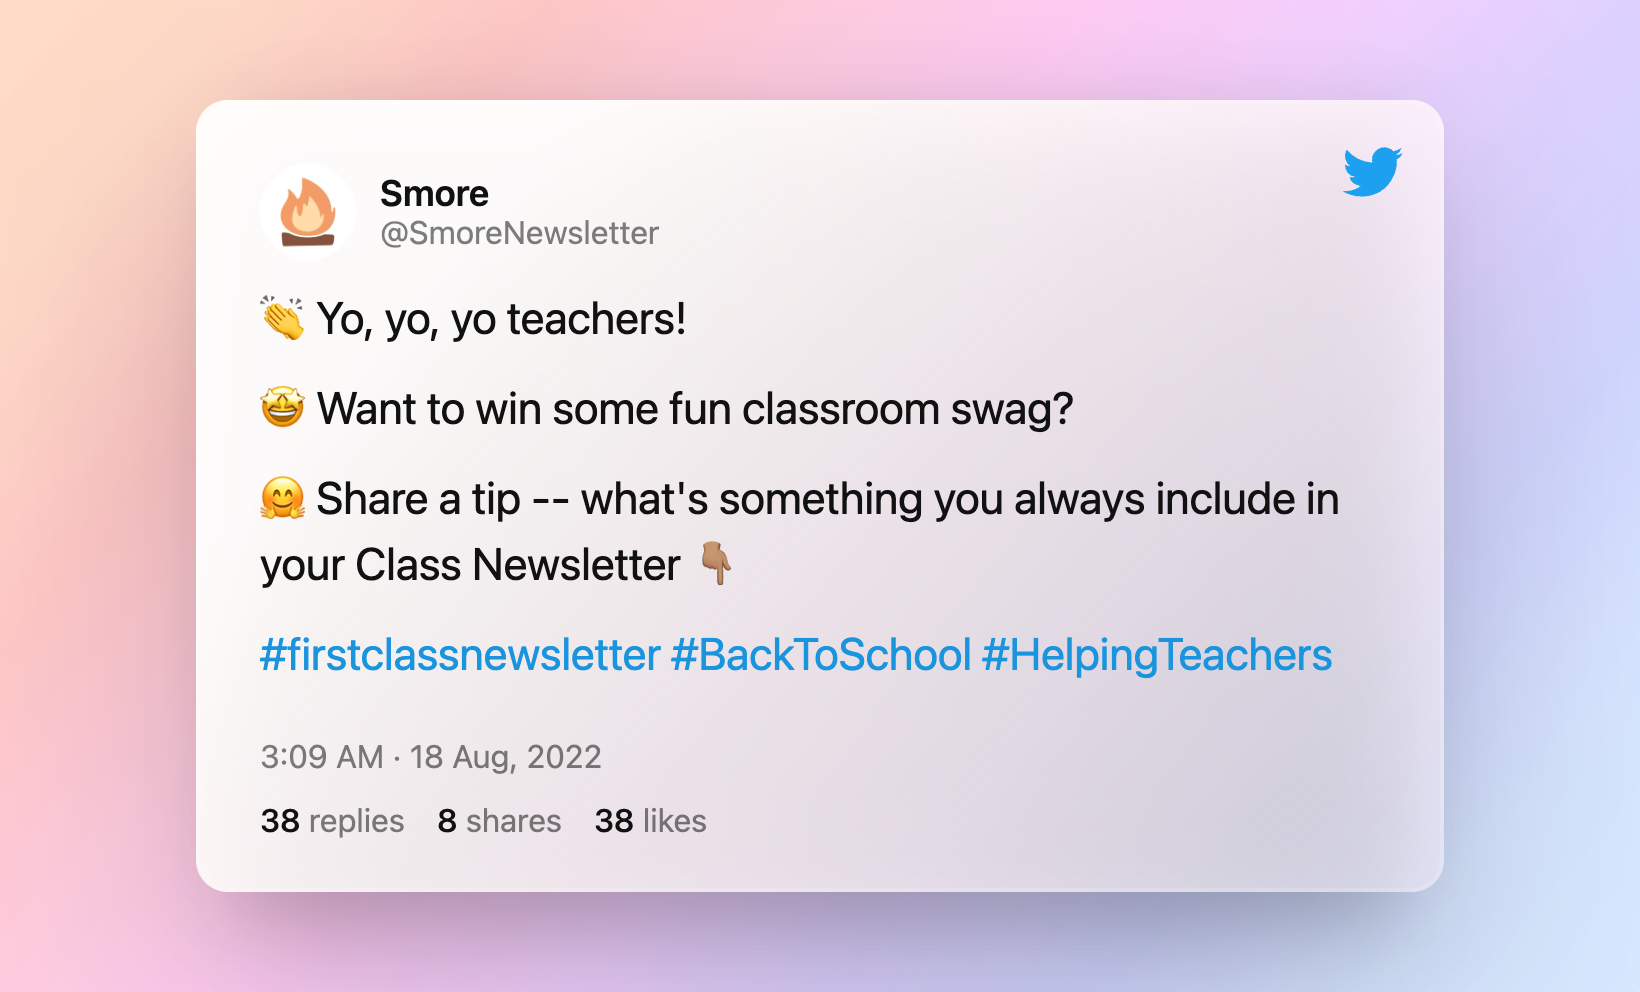 tweet asking teachers to share tips of what they include in a class newsletter